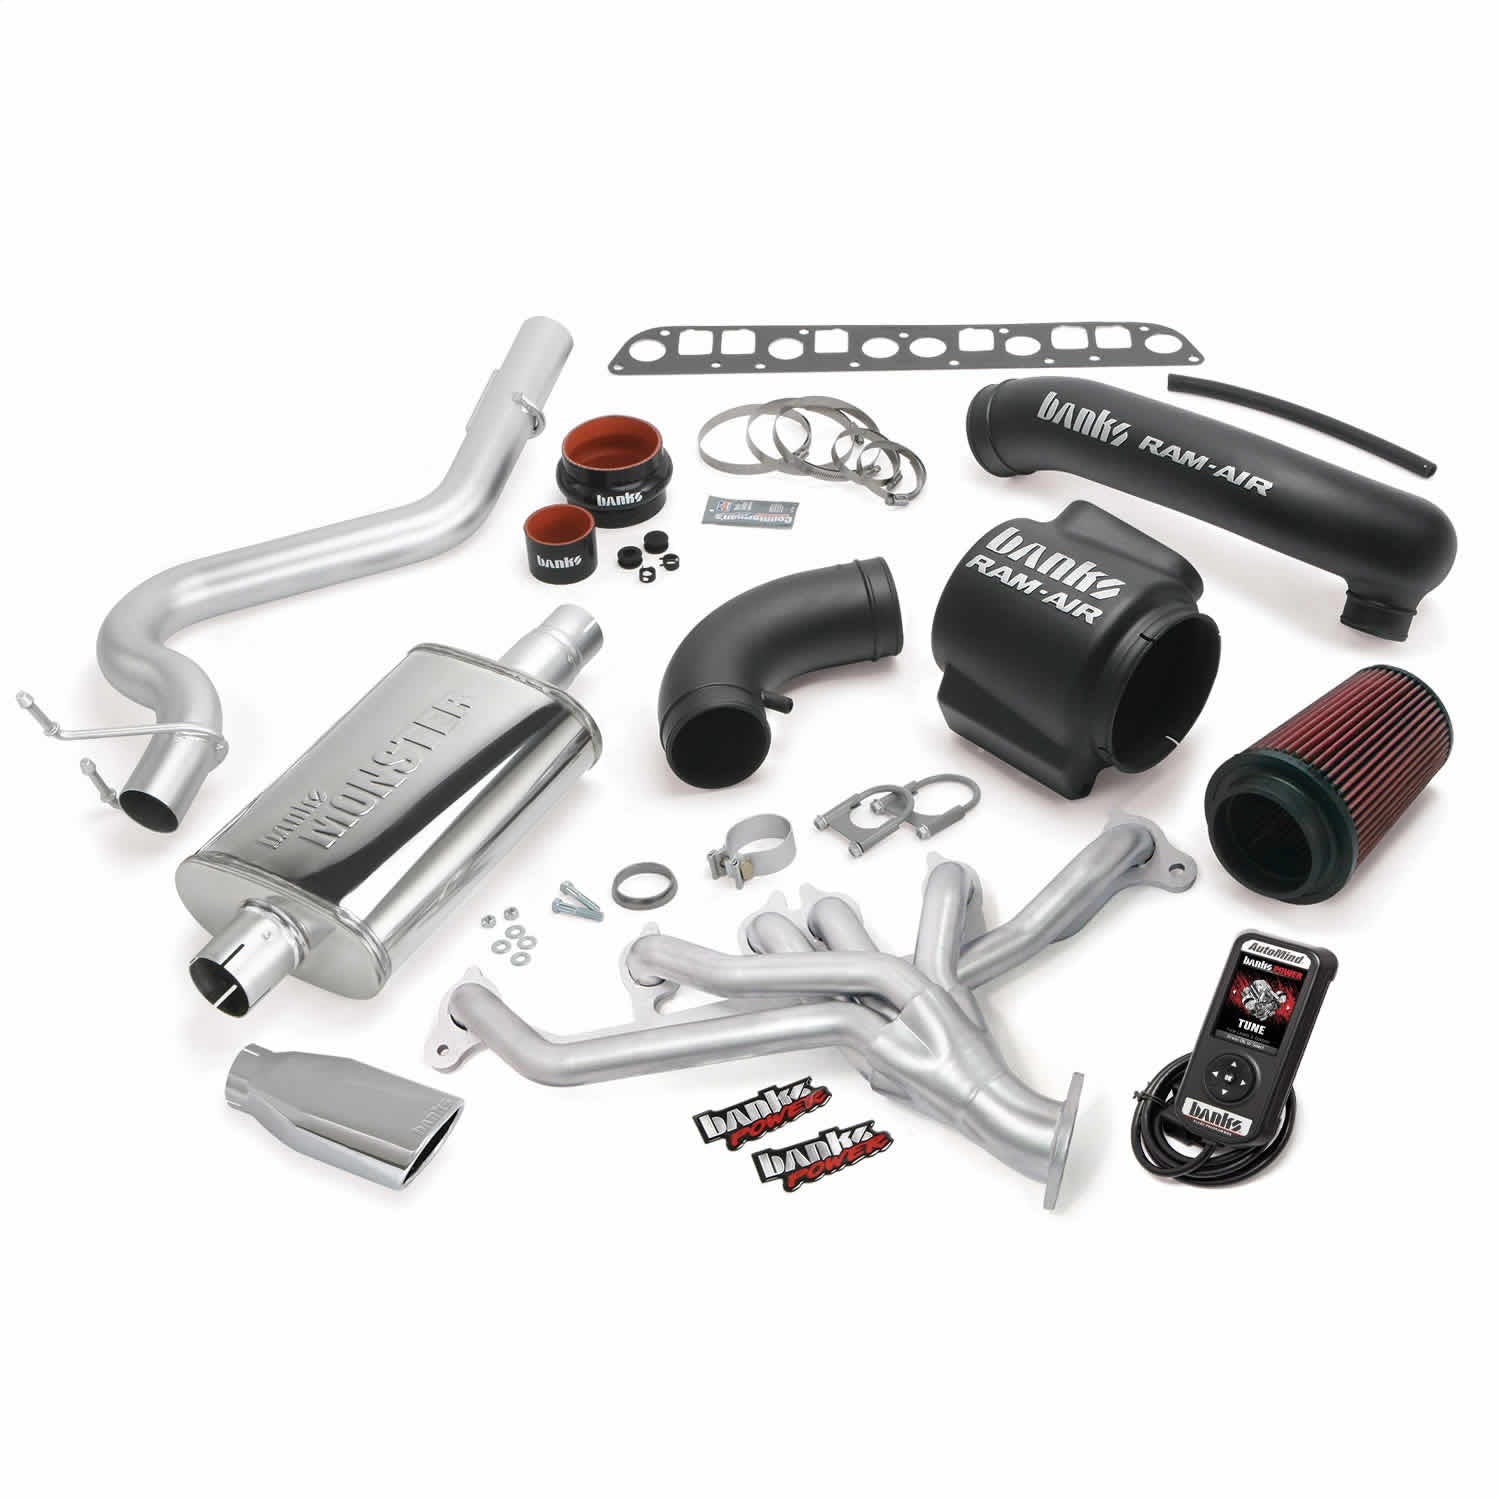 Banks Power 51331 Powerpack System-1998-99 Jeep 4.0L Wrangler